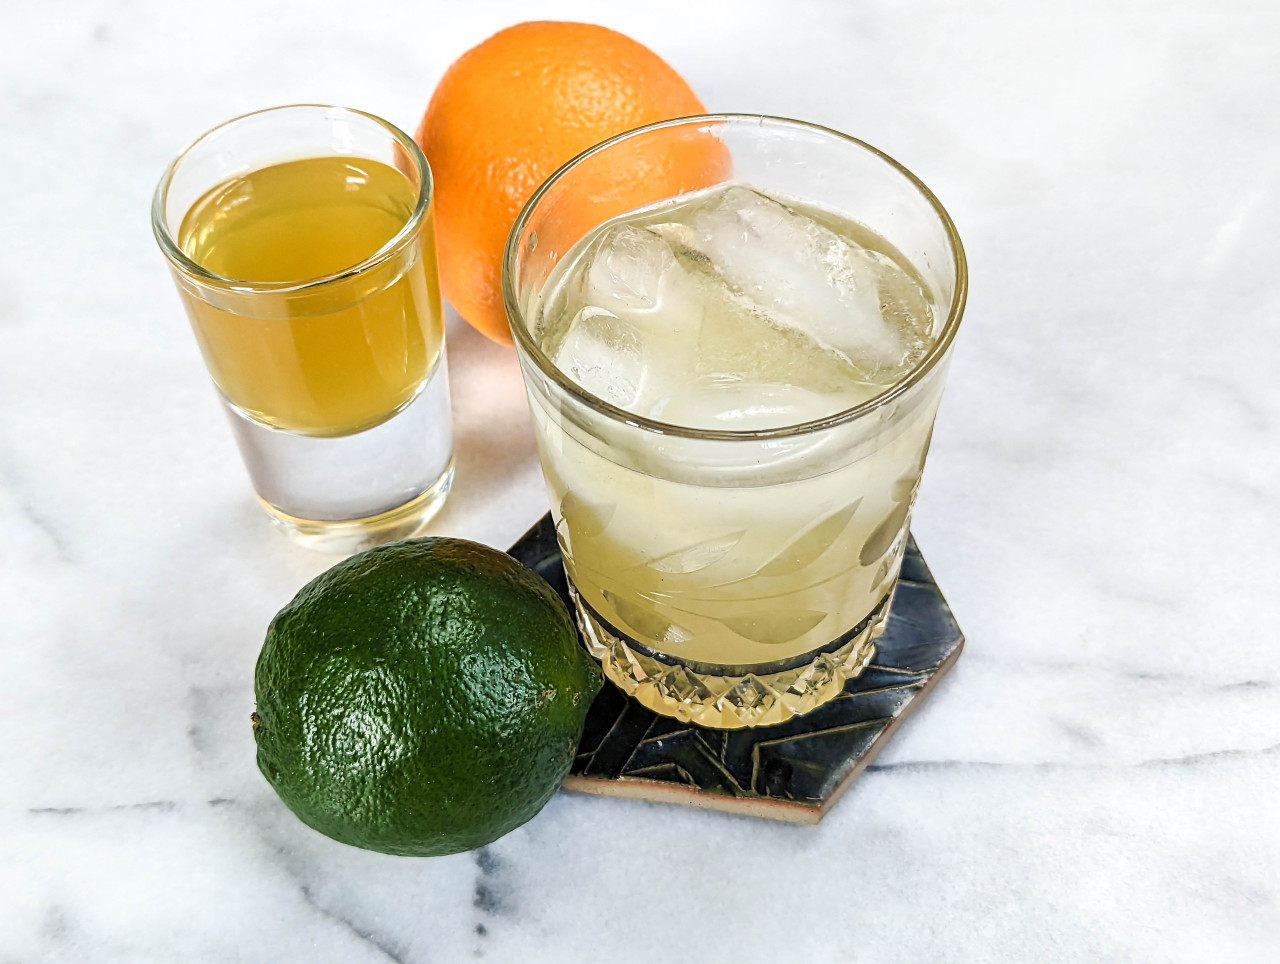 Three-quarter photograph of a margarita in a crystal glass on a hexagonal coaster, with a lime next to it and a shot glass of orange liqueur next to an orange behind them, all on a marble background